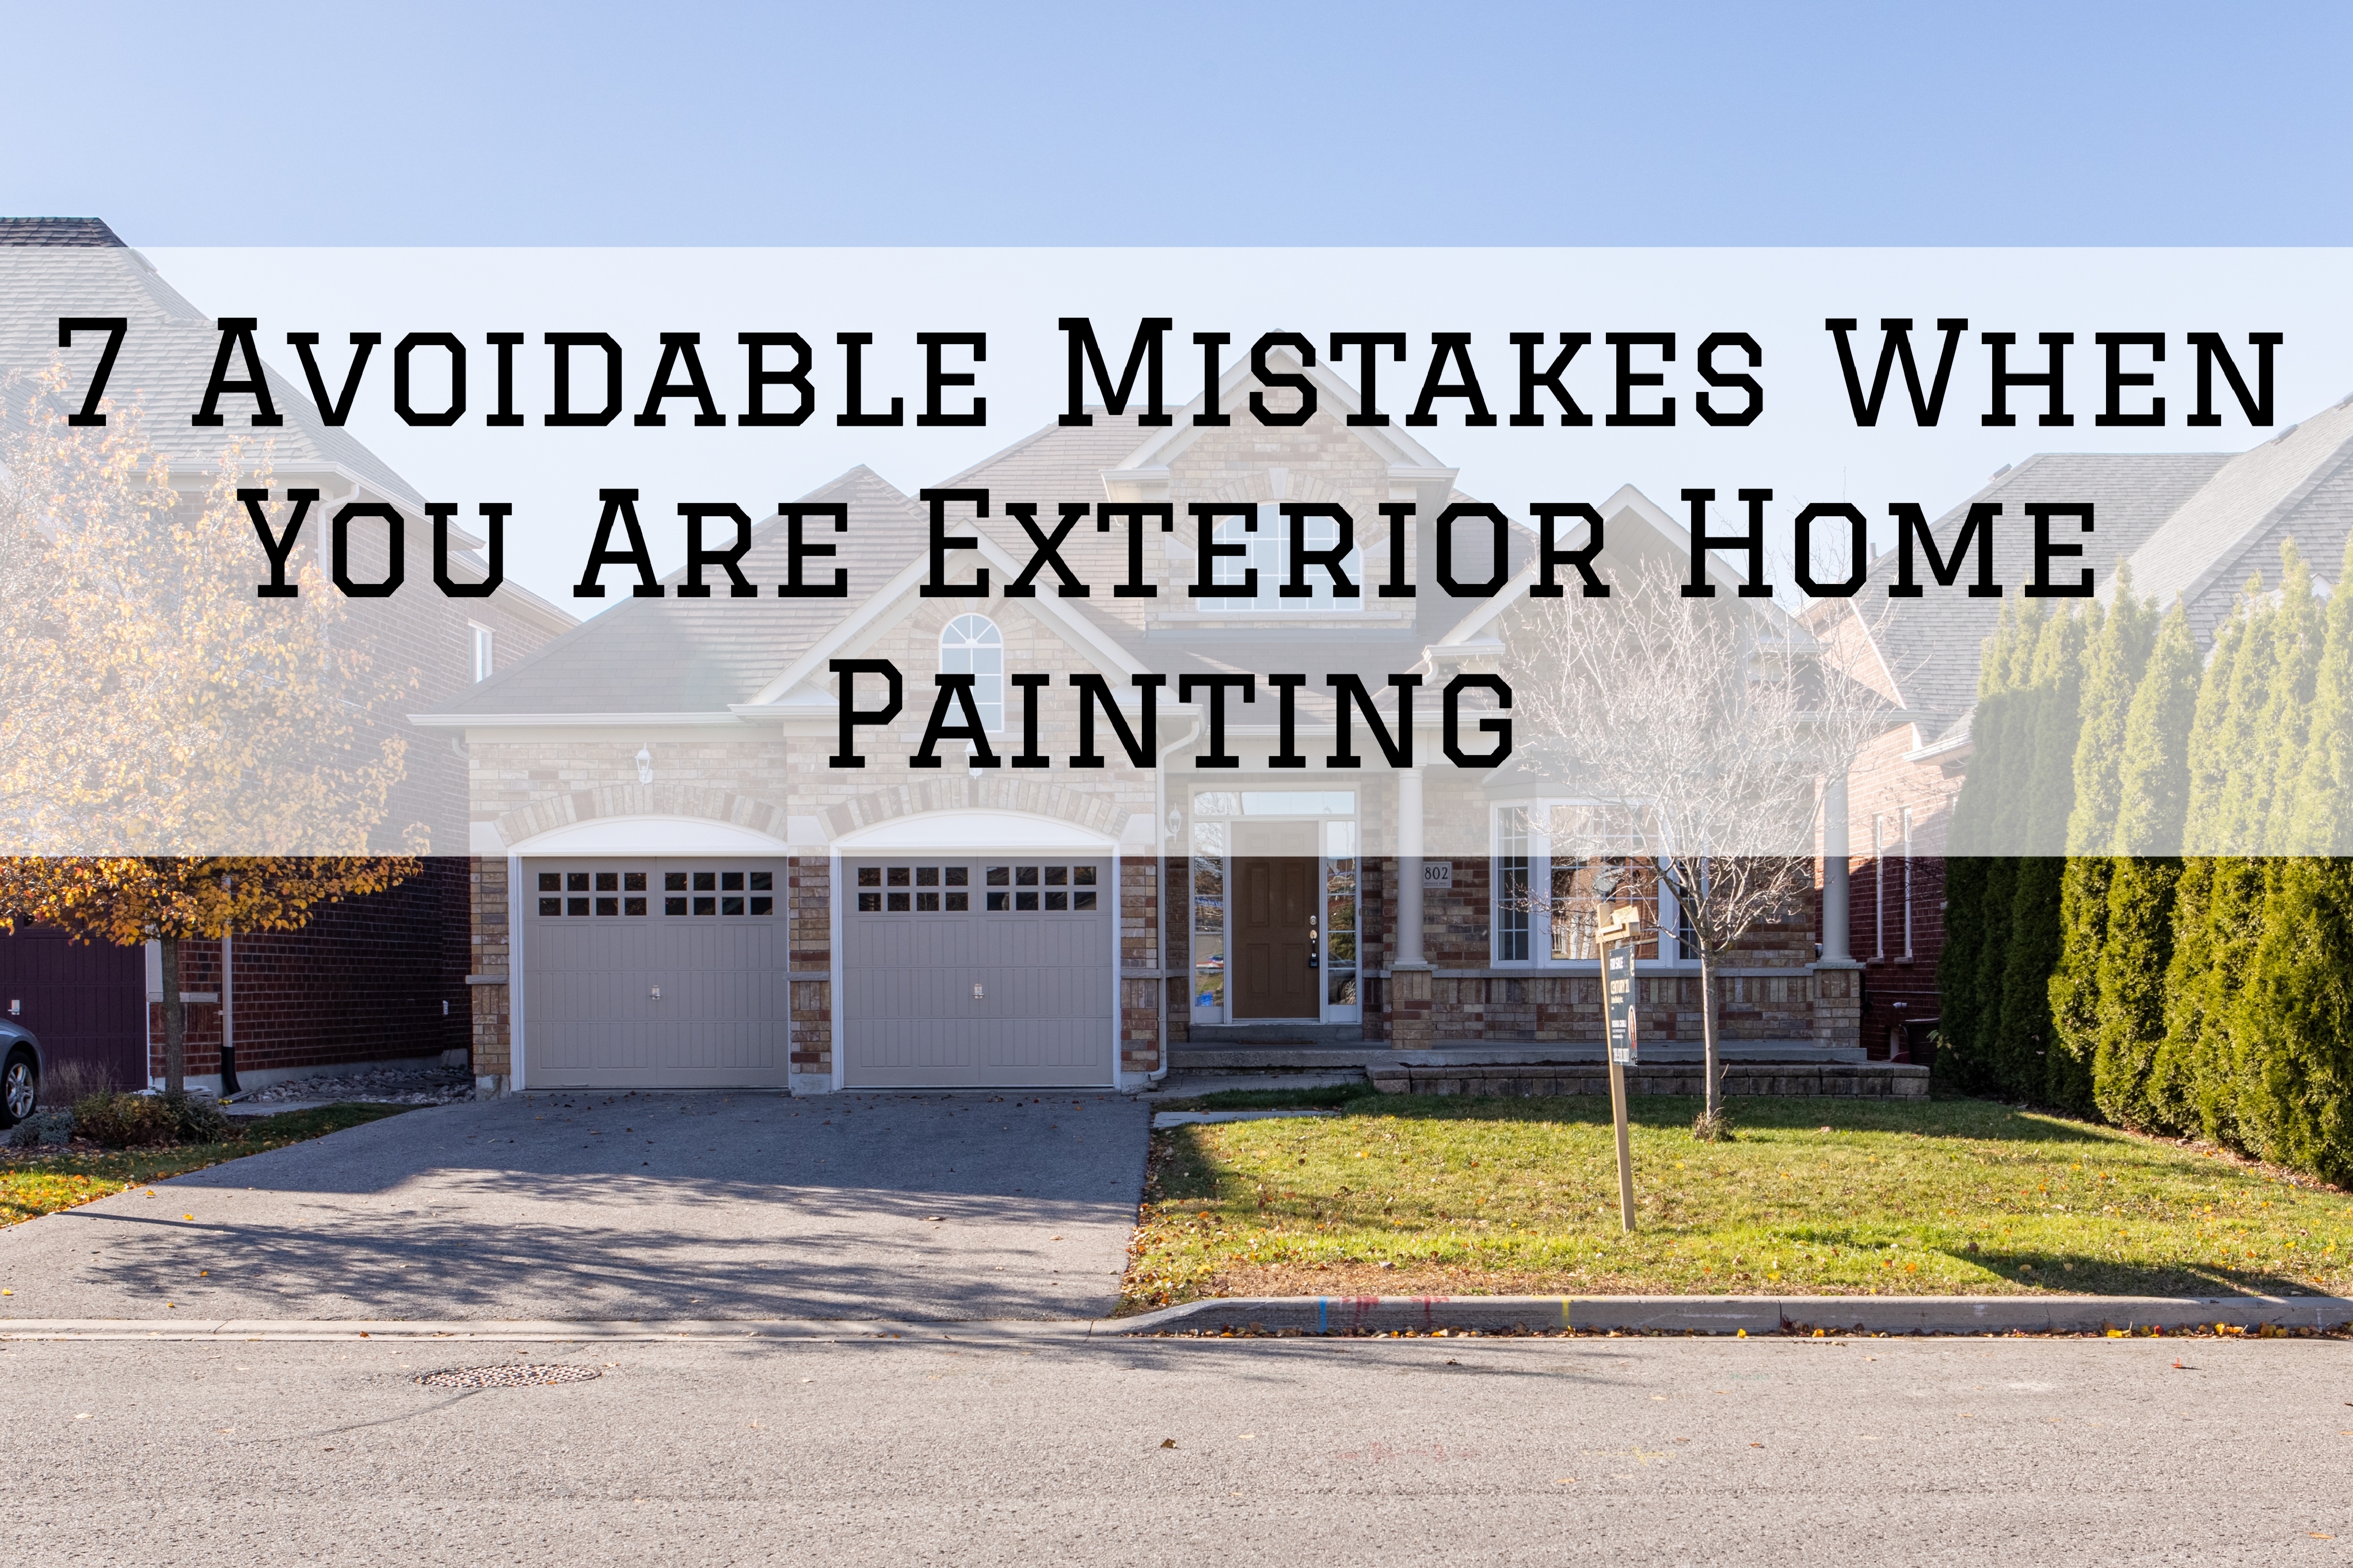 2021-04-21 Millers Painting Ottawa Ontario Exterior Home Painting Mistakes